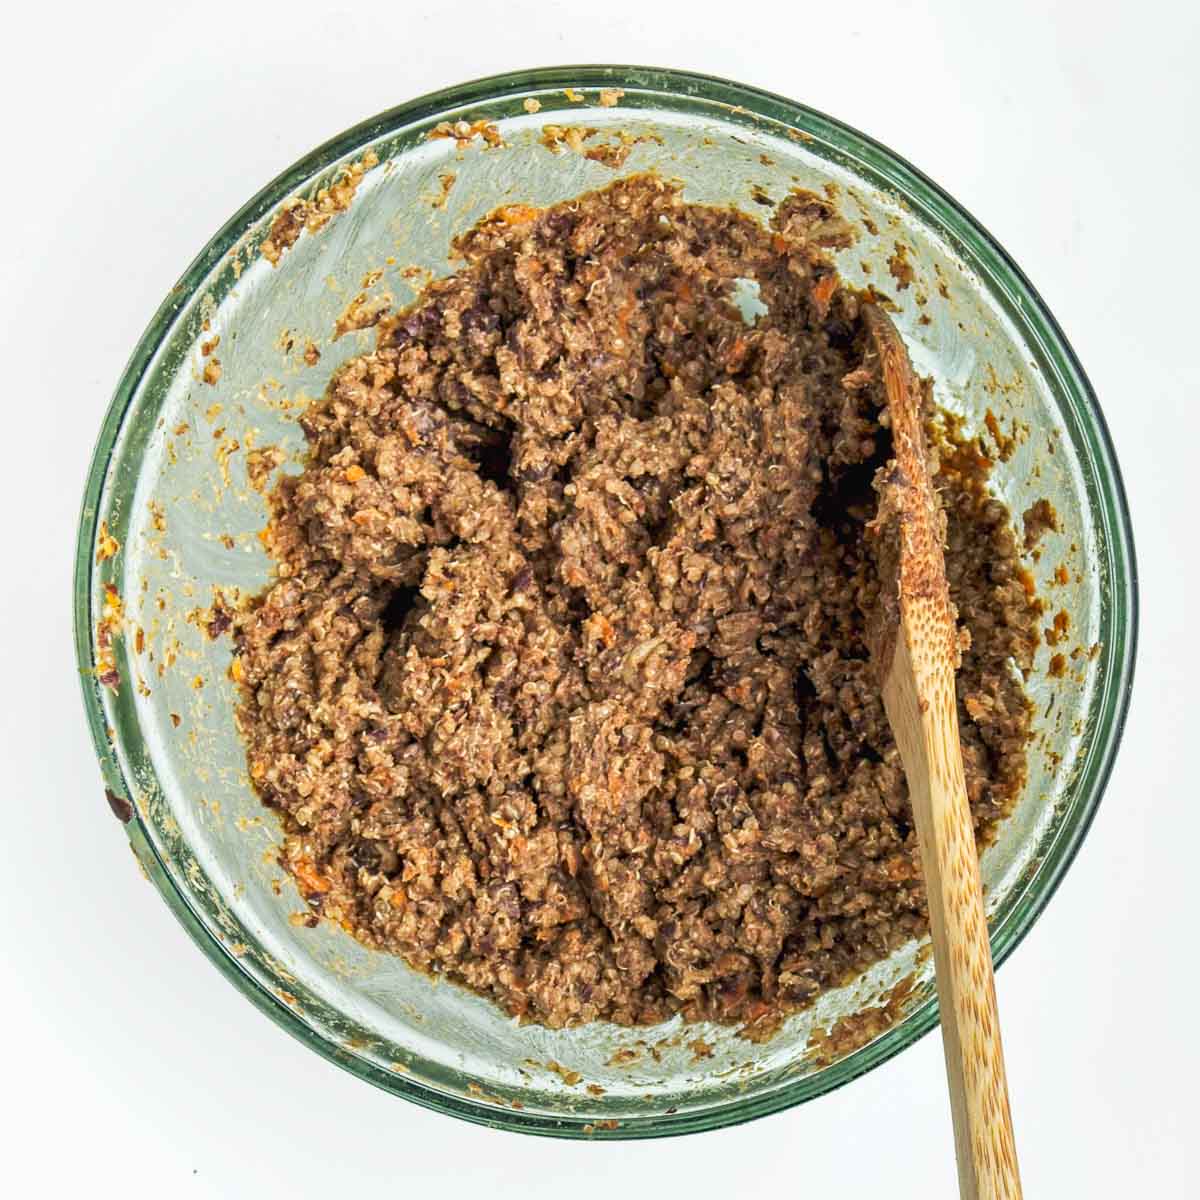 Mashed black bean and quinoa mixture for vegan burgers in a bowl